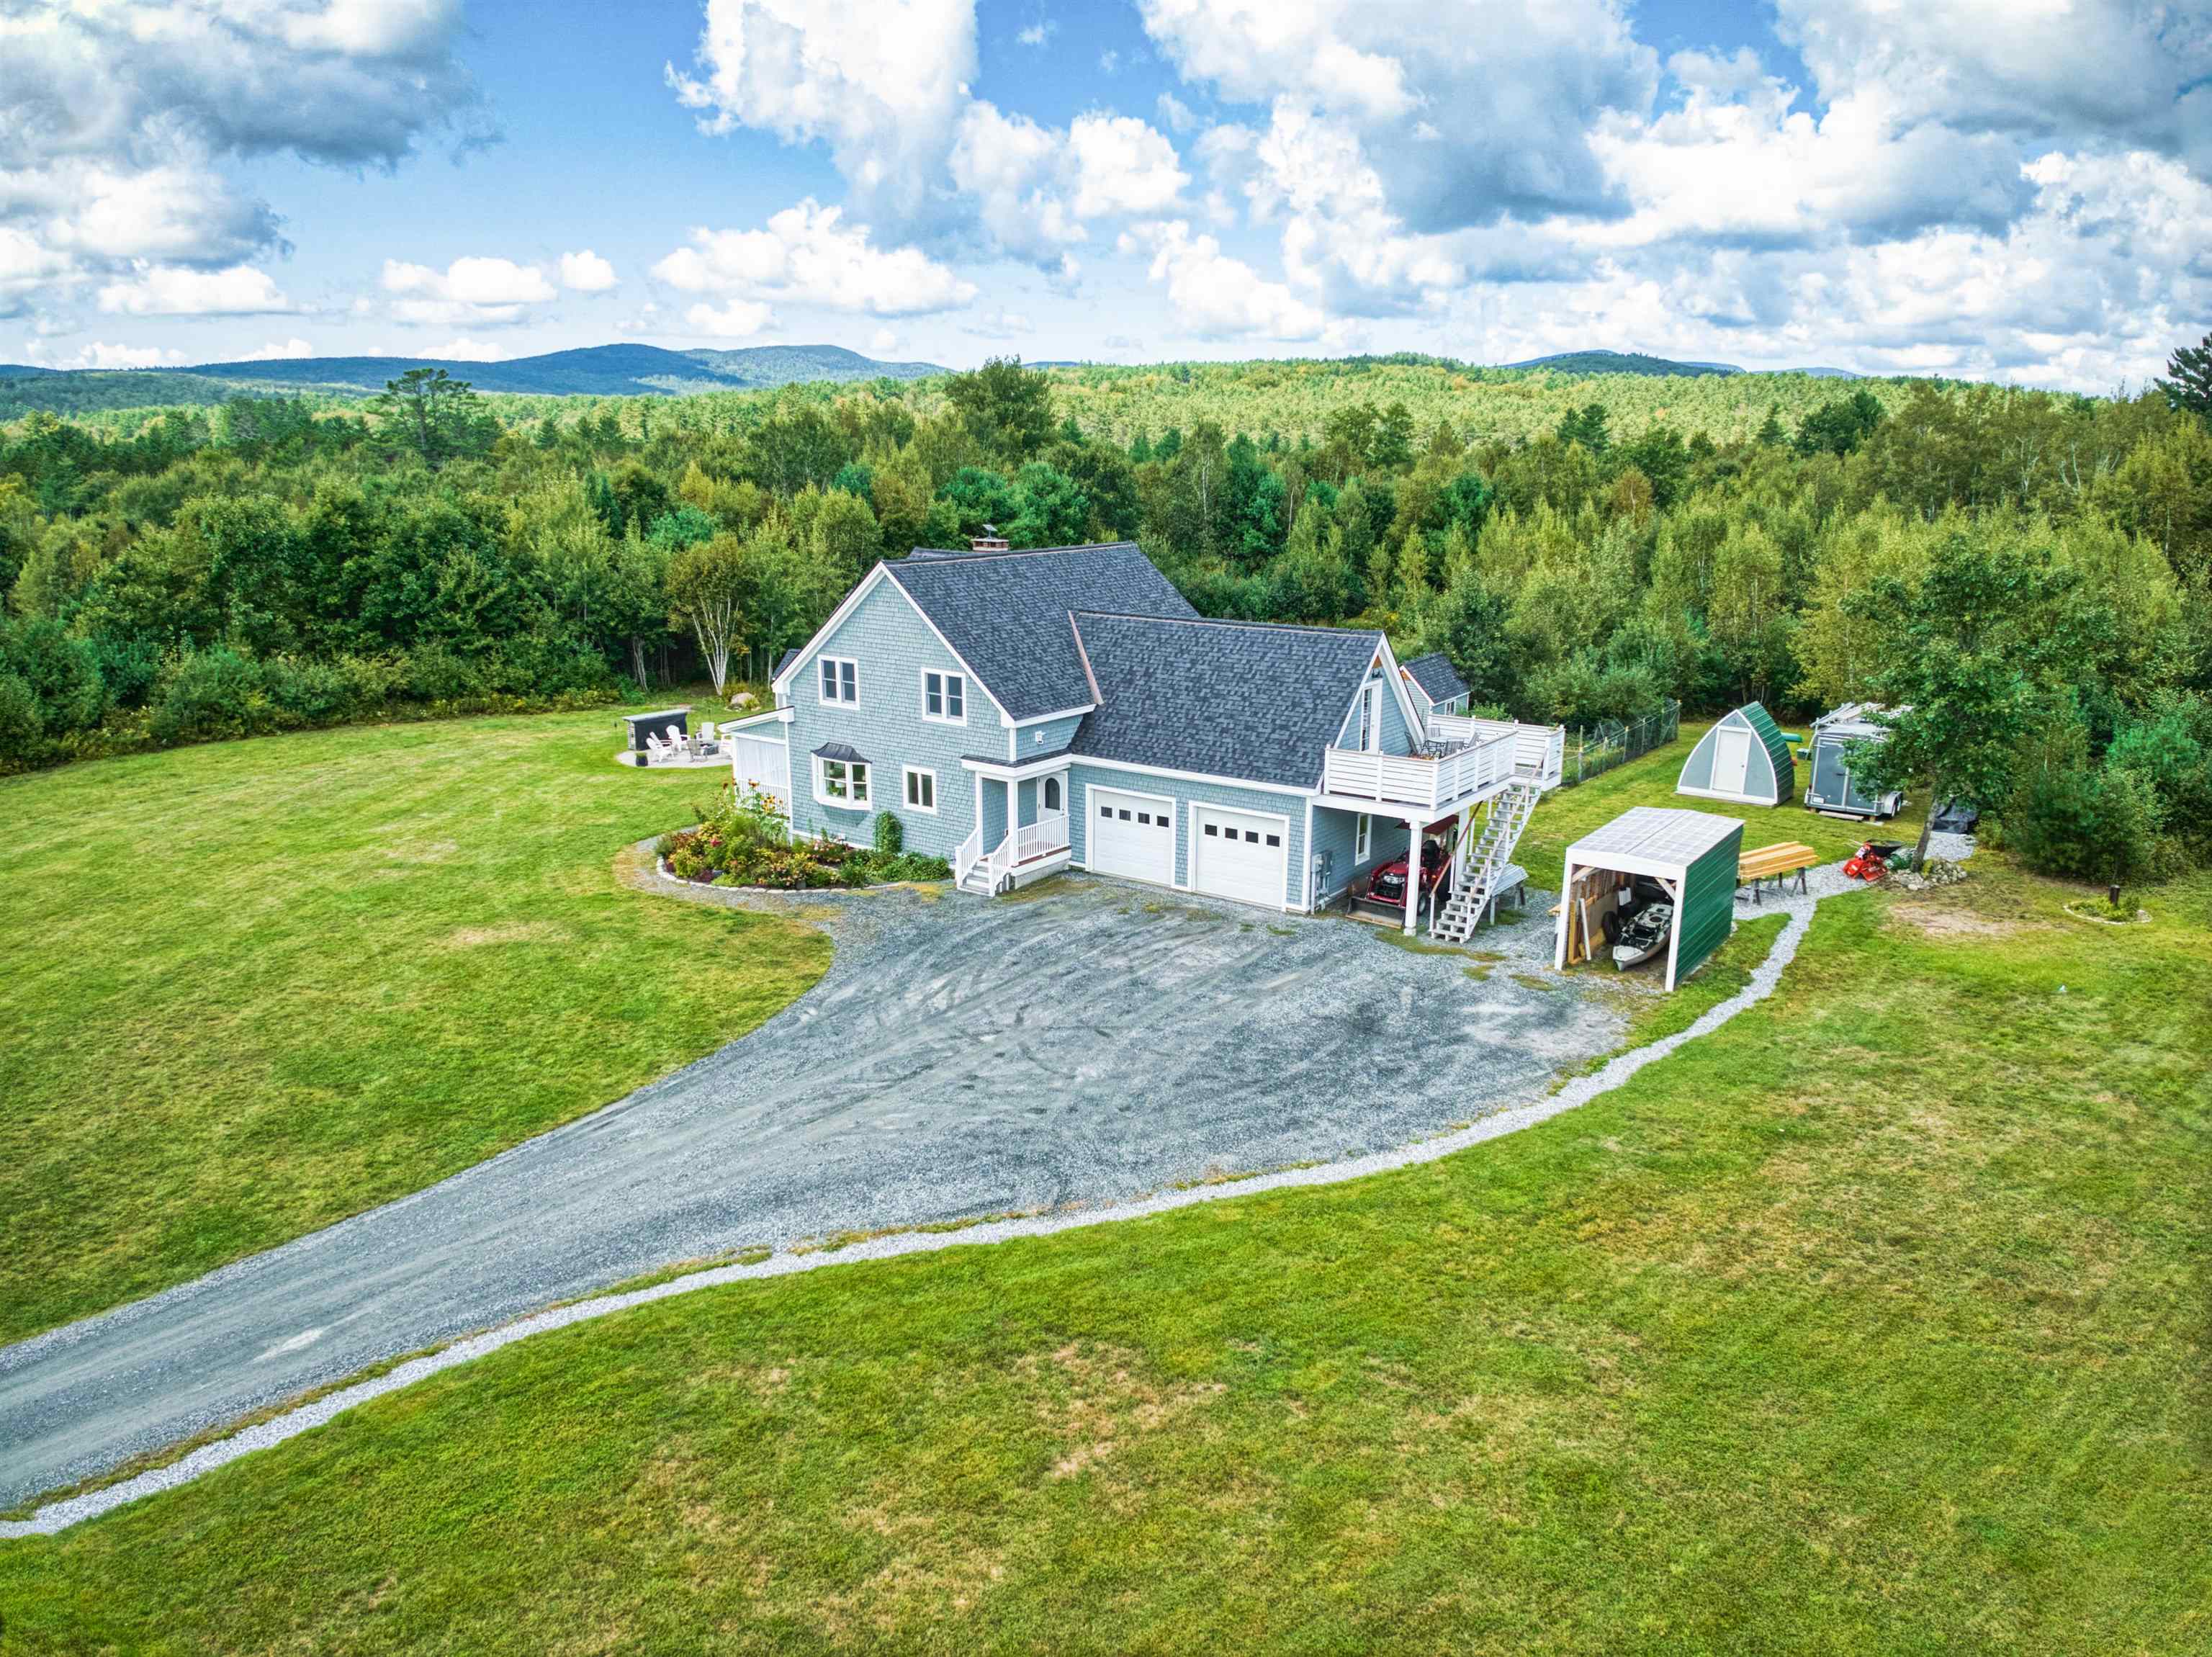 NEWPORT NH Homes for sale